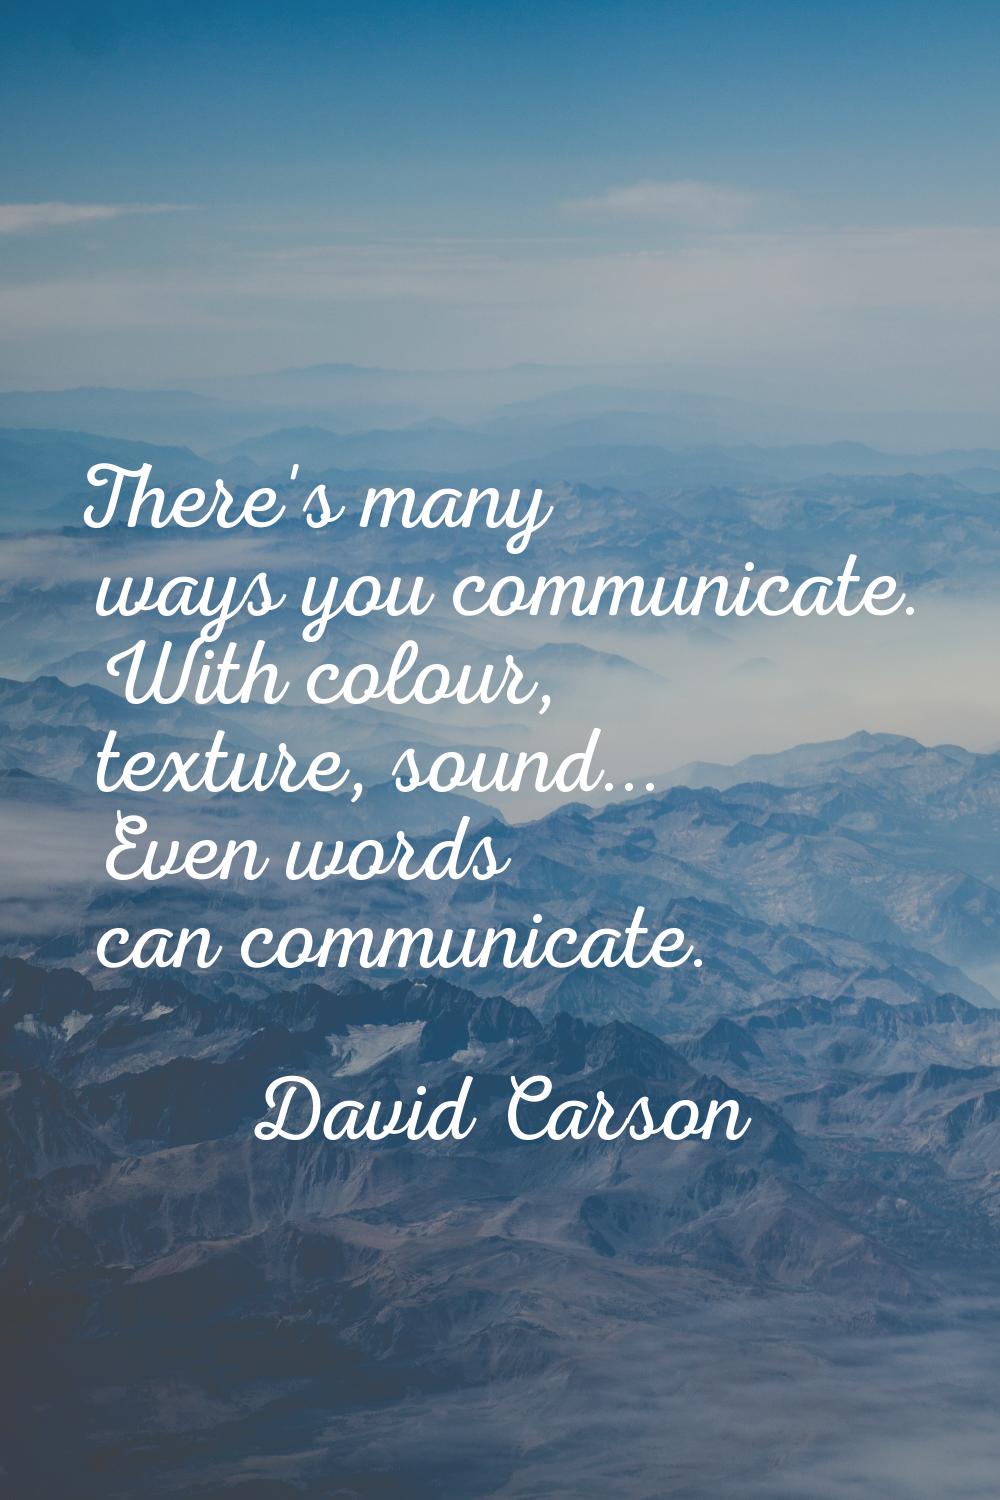 There's many ways you communicate. With colour, texture, sound... Even words can communicate.